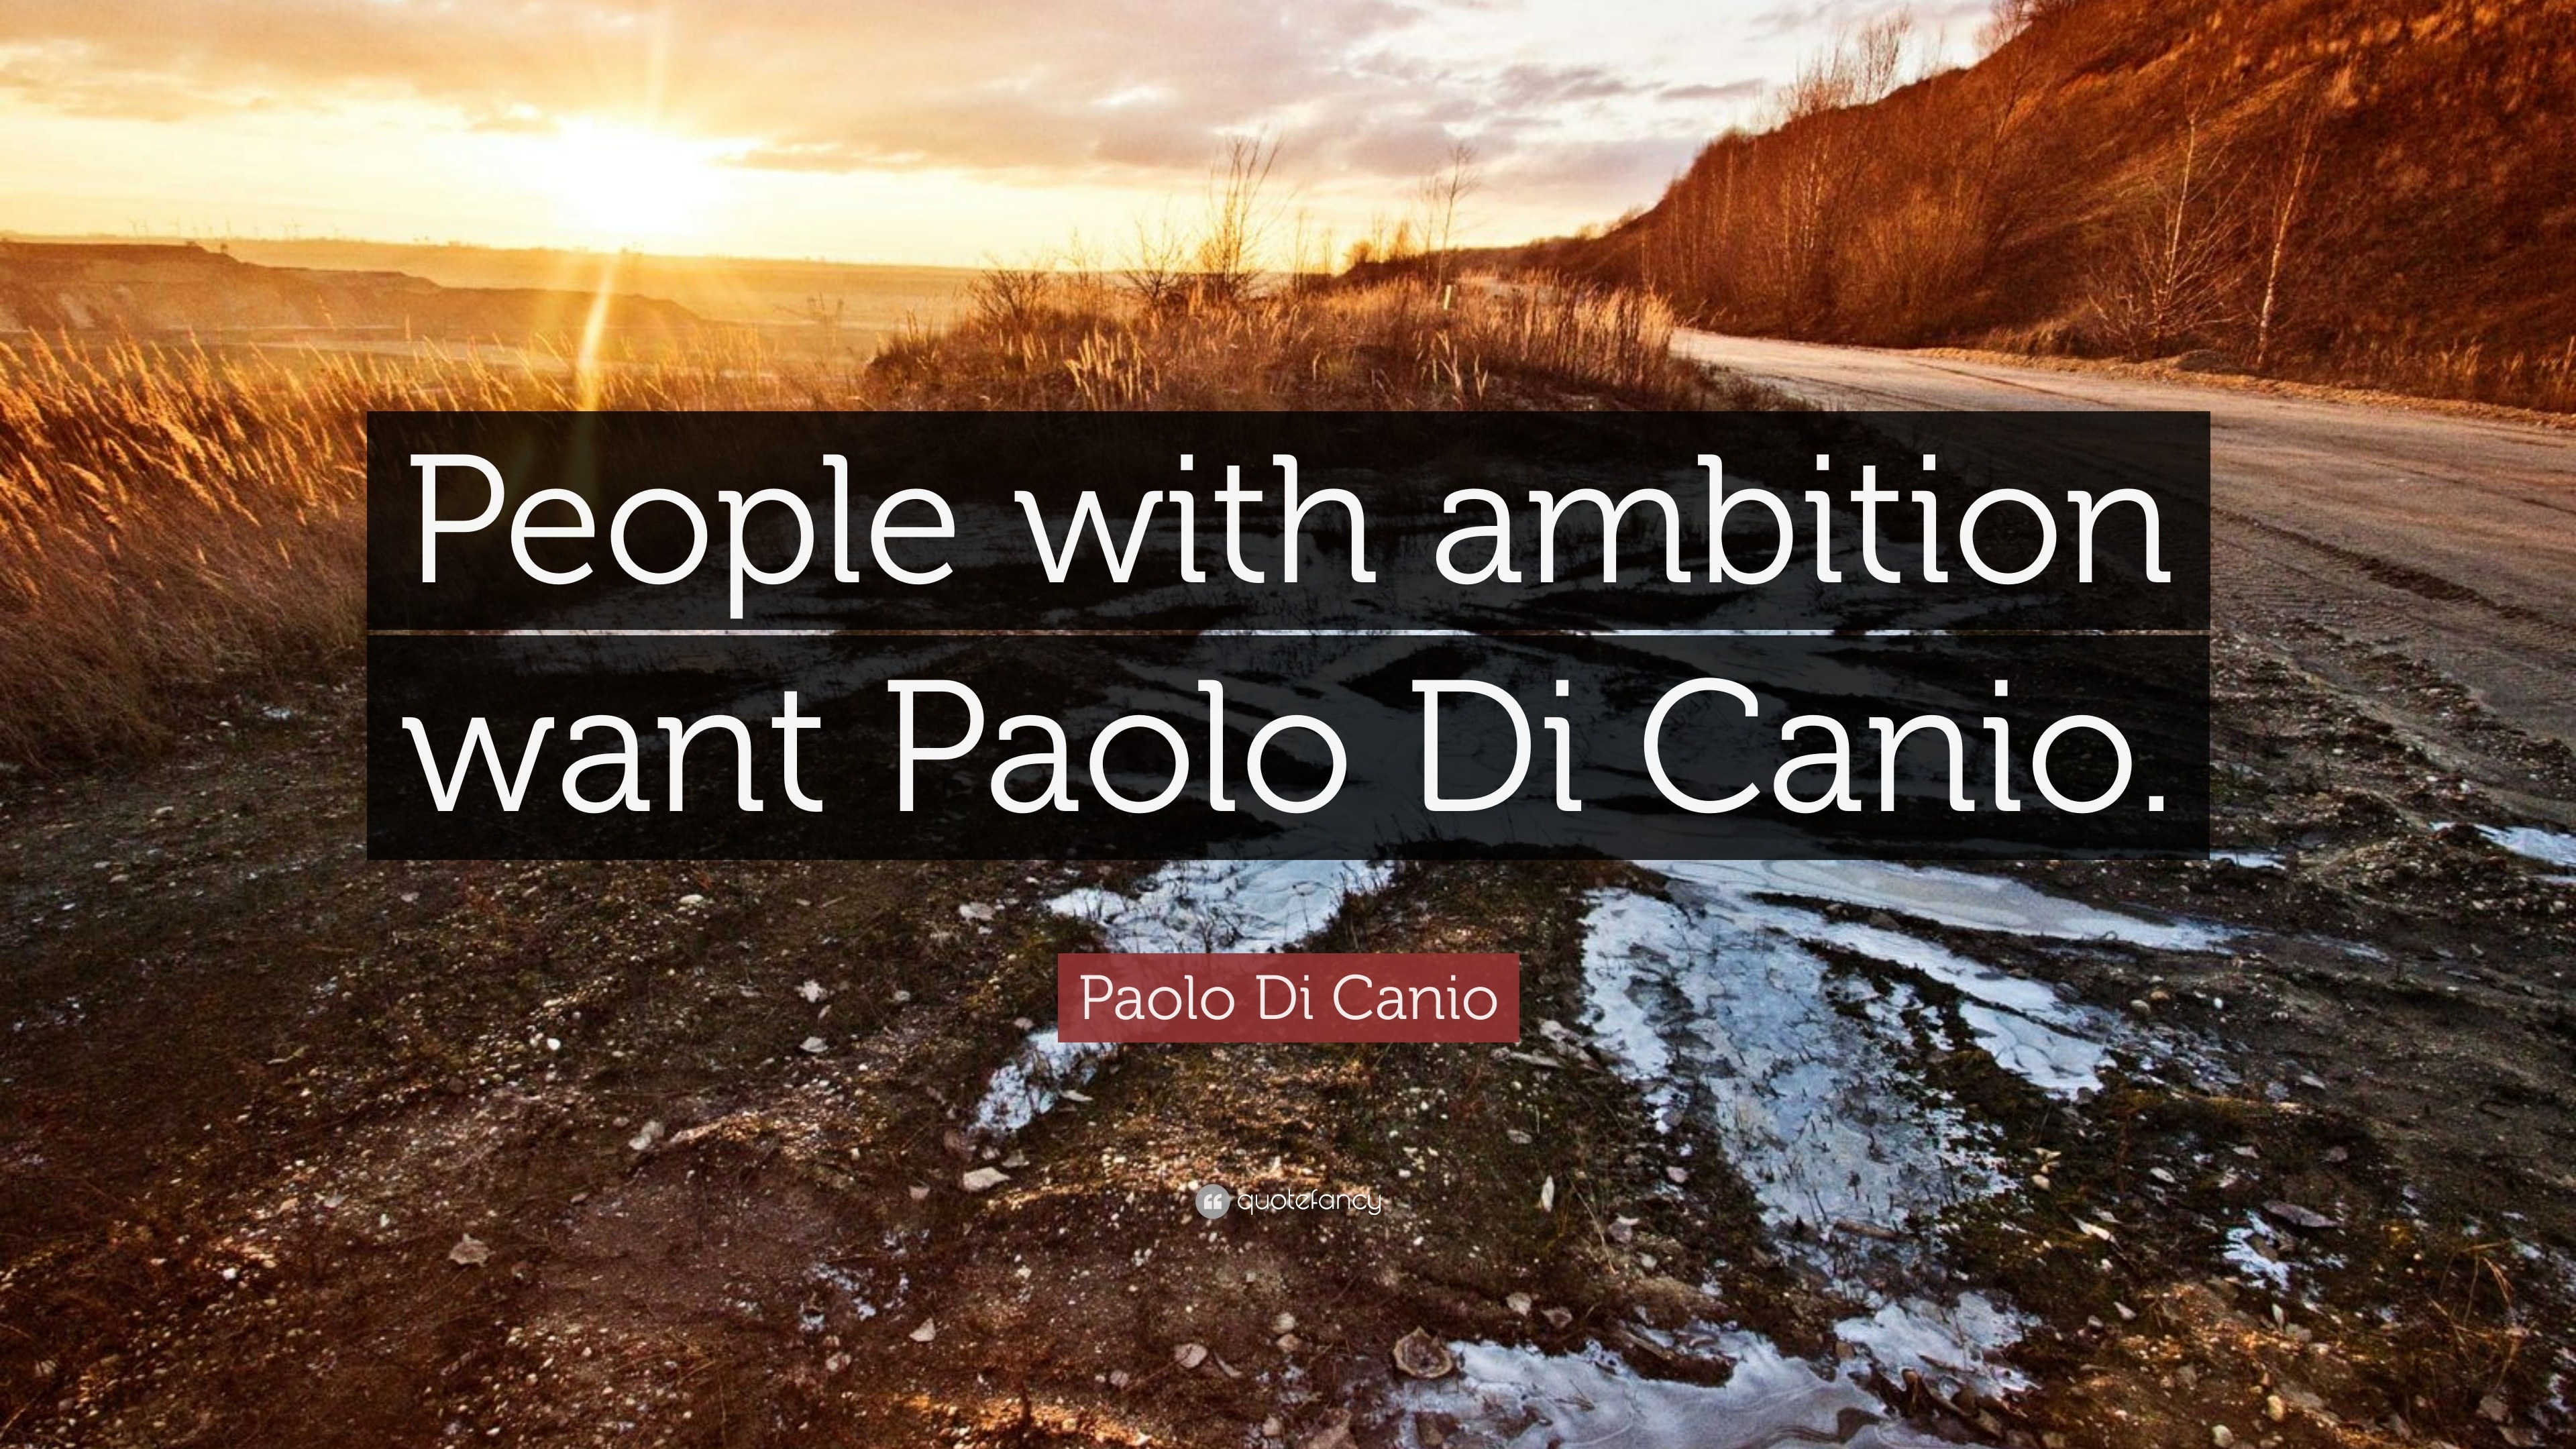 Top 10 Paolo Di Canio Quotes (2023 Update) - Quotefancy